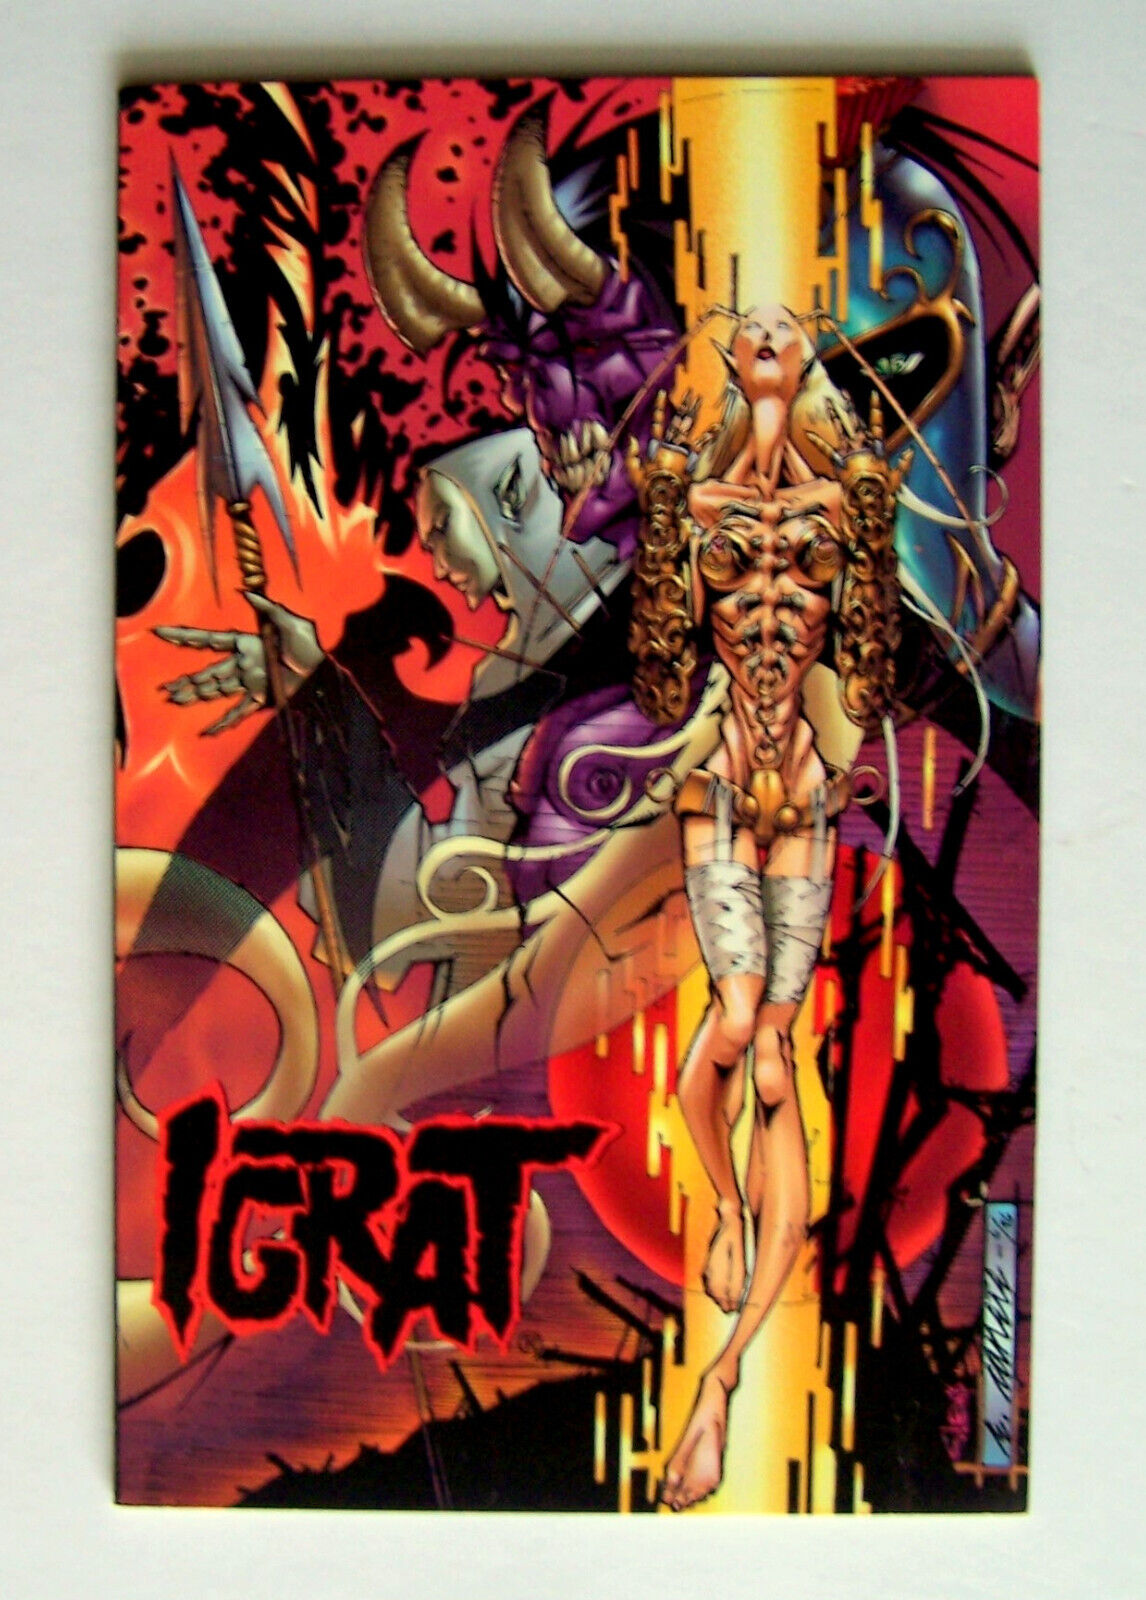 IGRAT ASSASSIN OF HELL - by VEROTIK – 1996-Trade Paper Back TPB - Excellent Cond